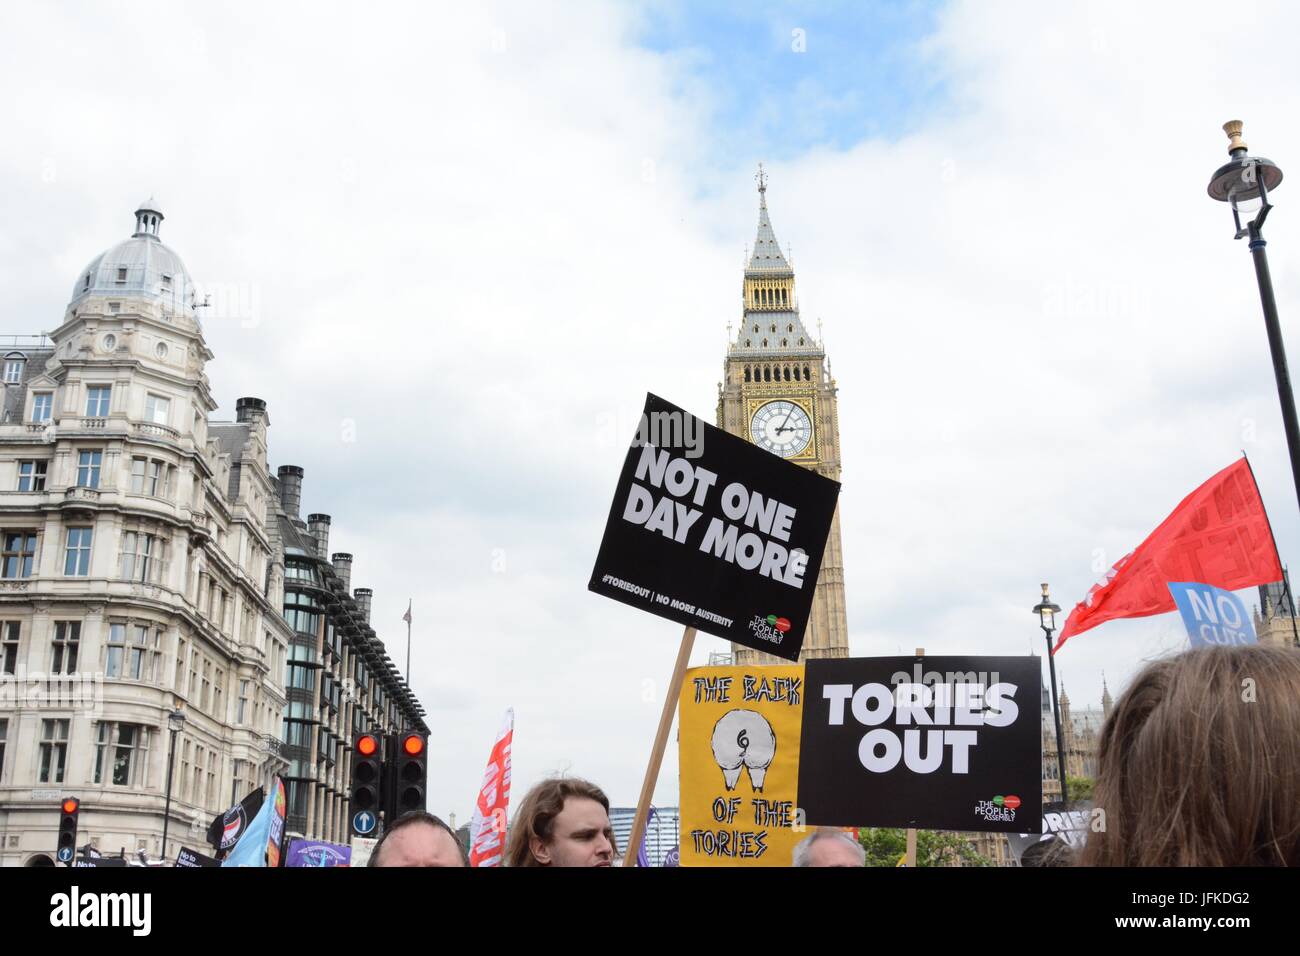 London, UK. 1st July 2017. A protest against the Conservative minority government marches through central London Credit: Patricia Phillips/Alamy Live News Stock Photo